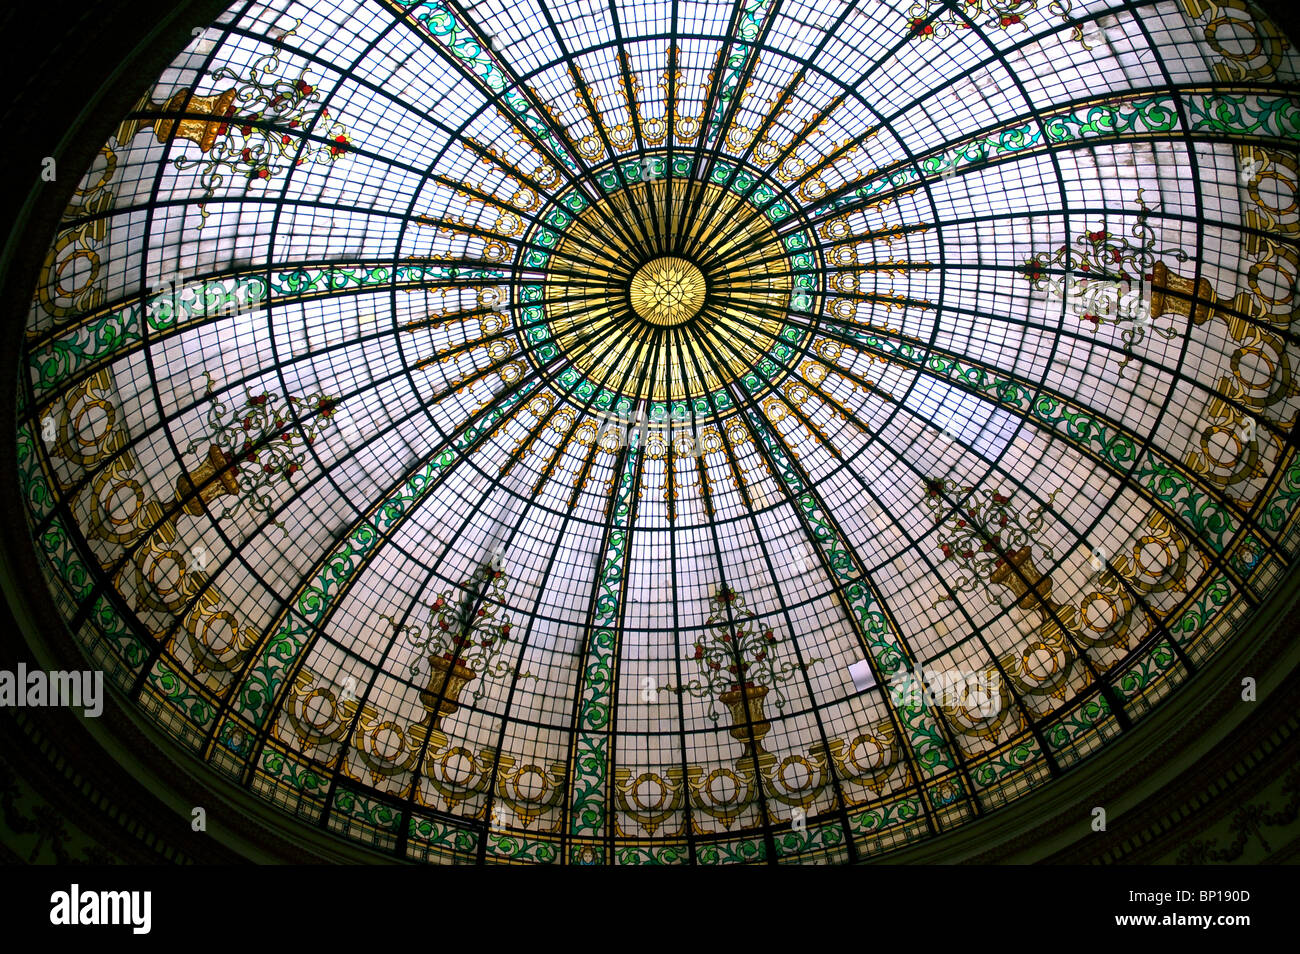 The Beautiful Stained Glass Dome Ceiling In The Gran Bolivar